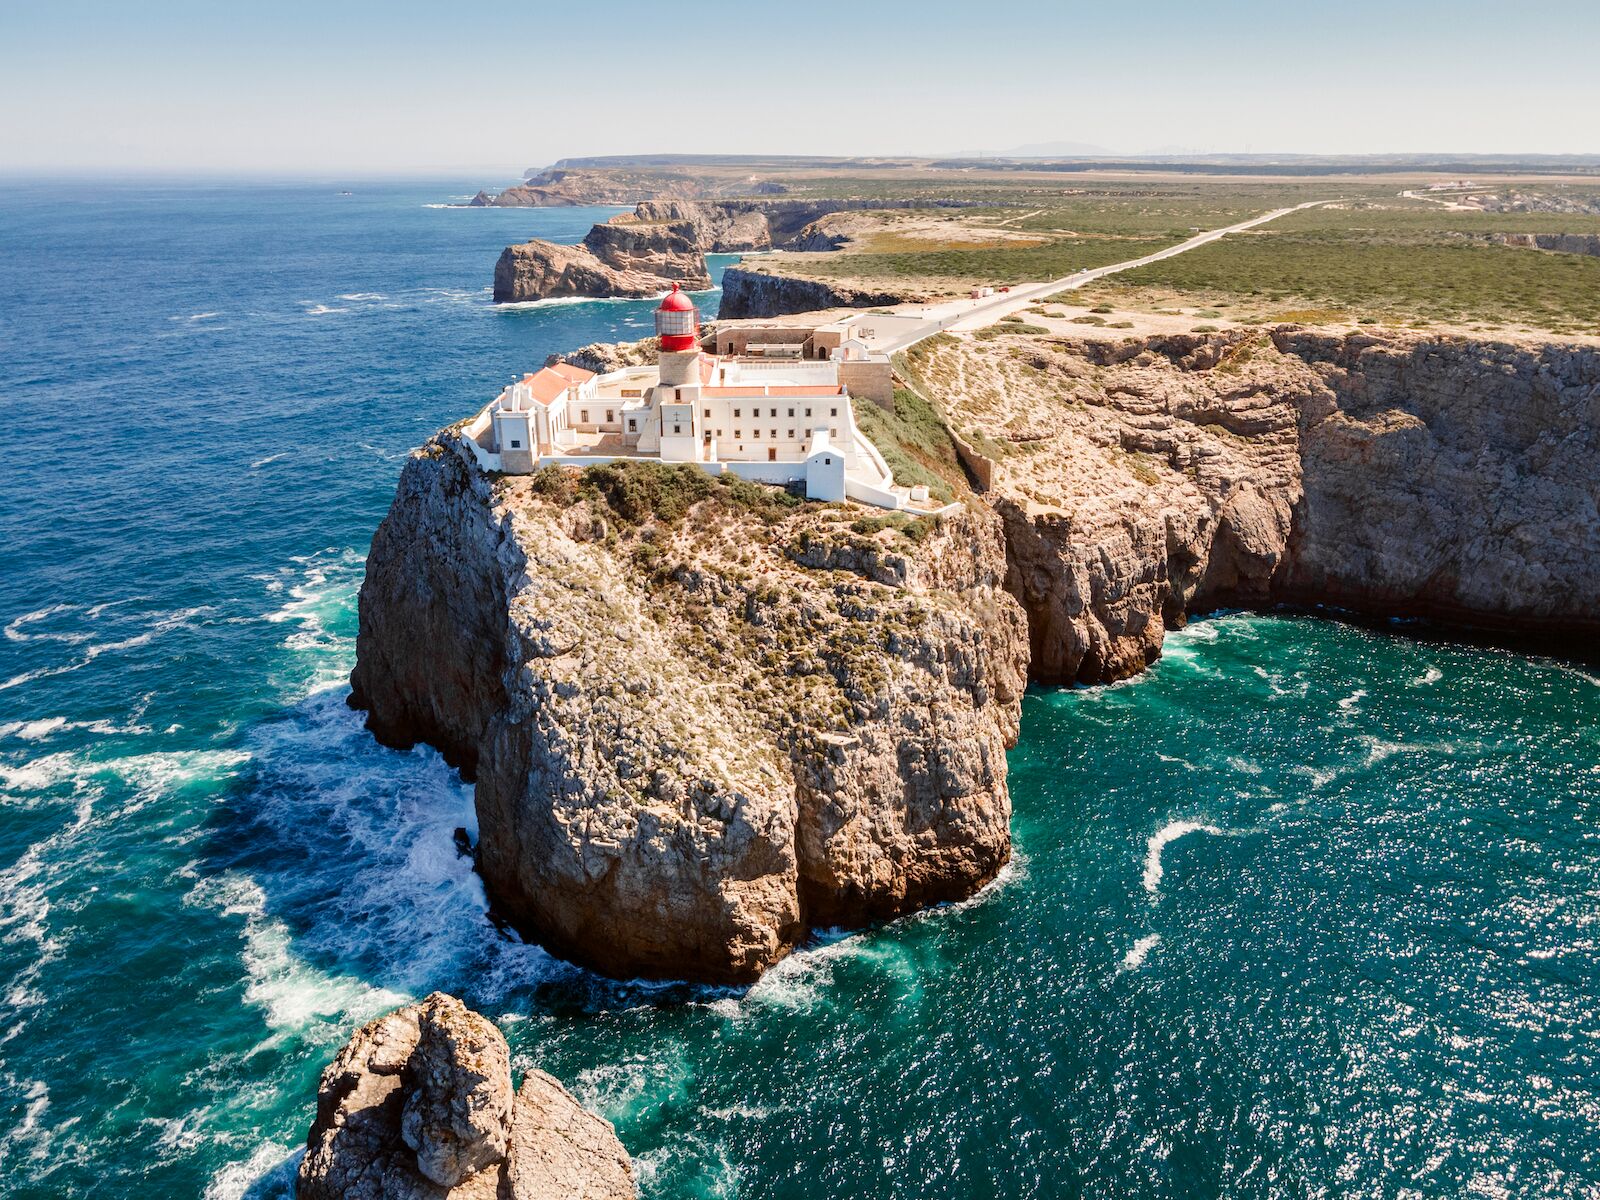 Beautiful lighthouse located on high cliffs of Saint Vincent cape  in Sagres, Algarve, Portugal